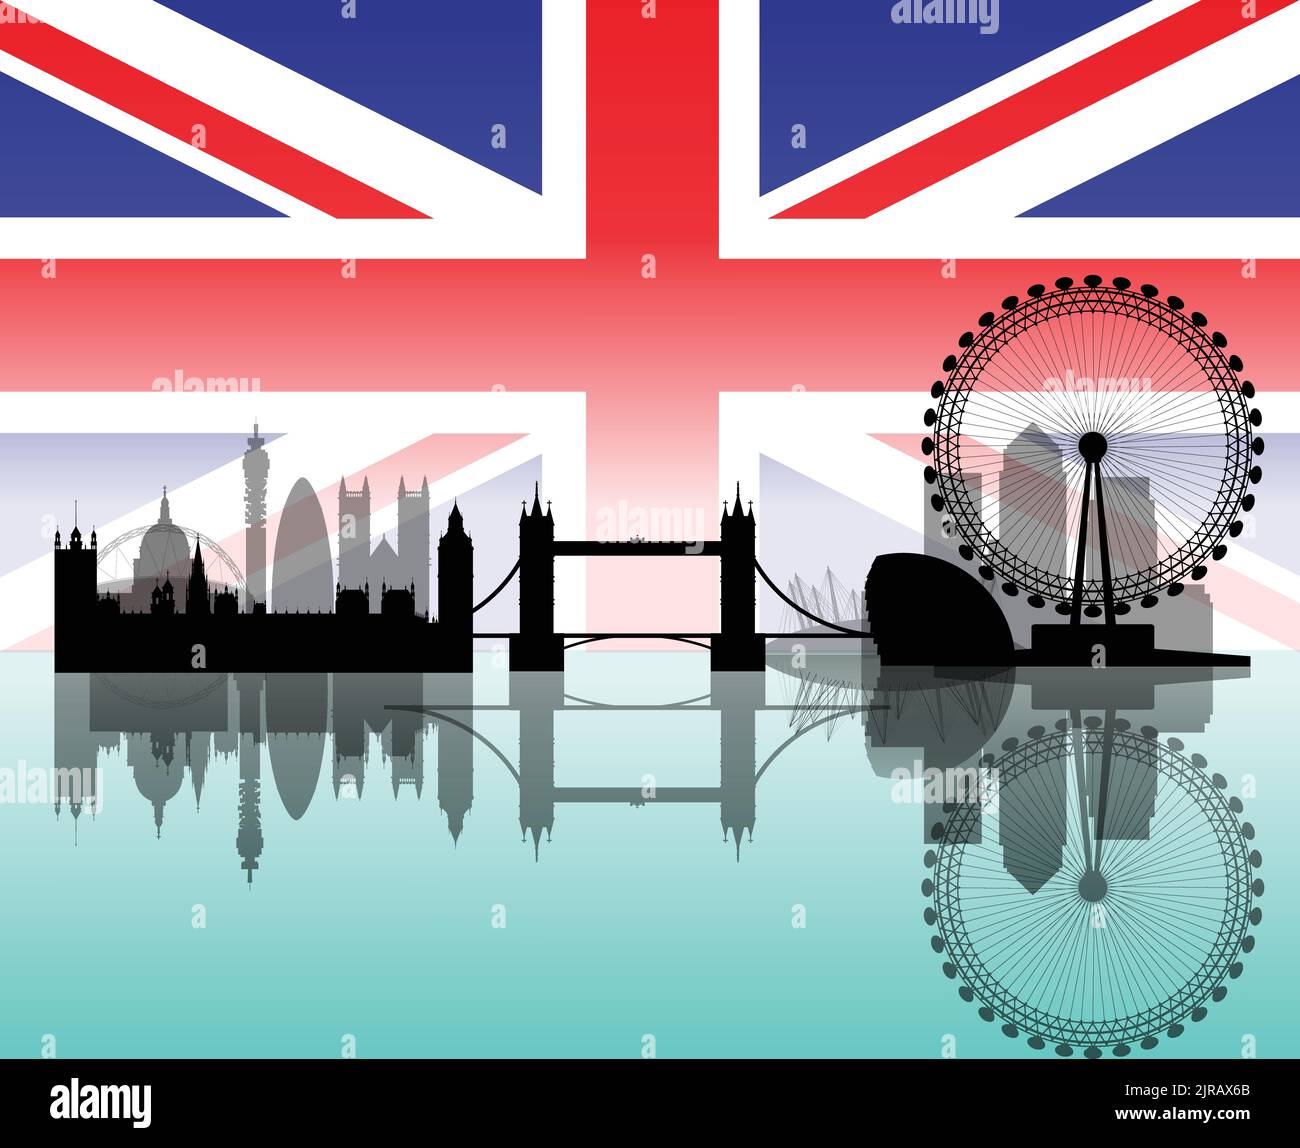 Illustration of London with Extreme Details and Transparency Over Union Jack Flag Stock Vector